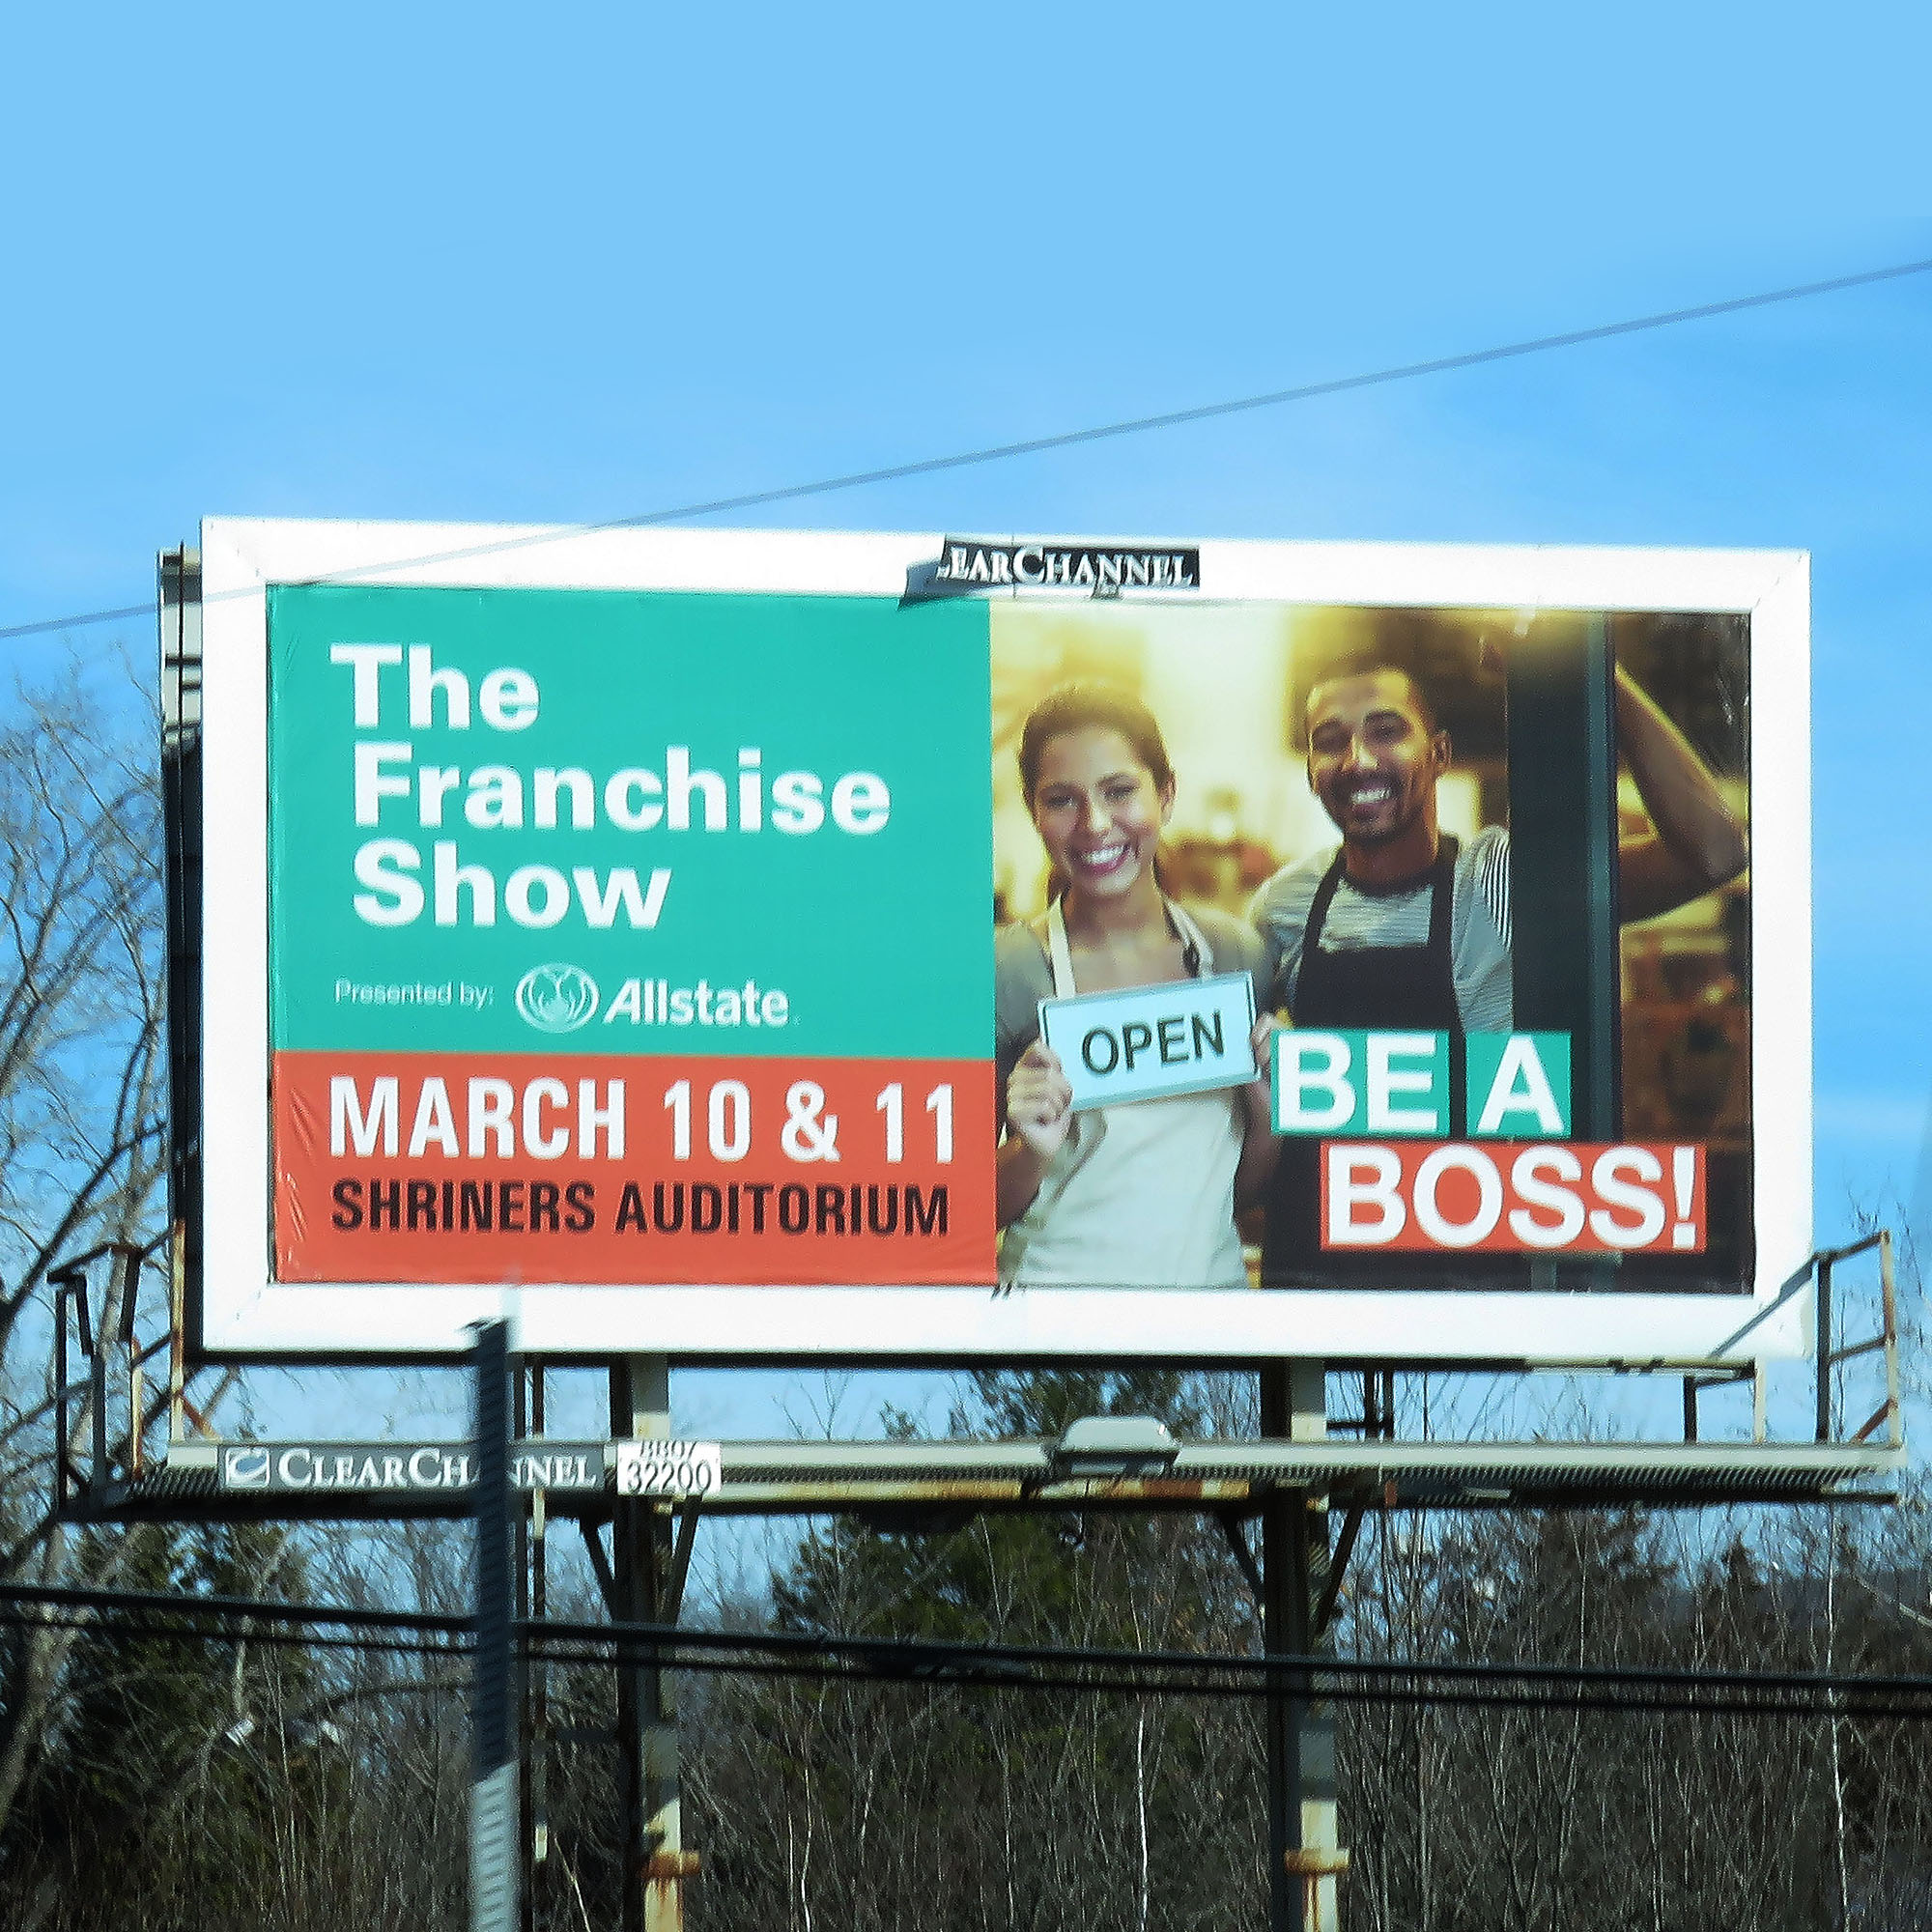 The Franchise Show - Outdoor Billboards